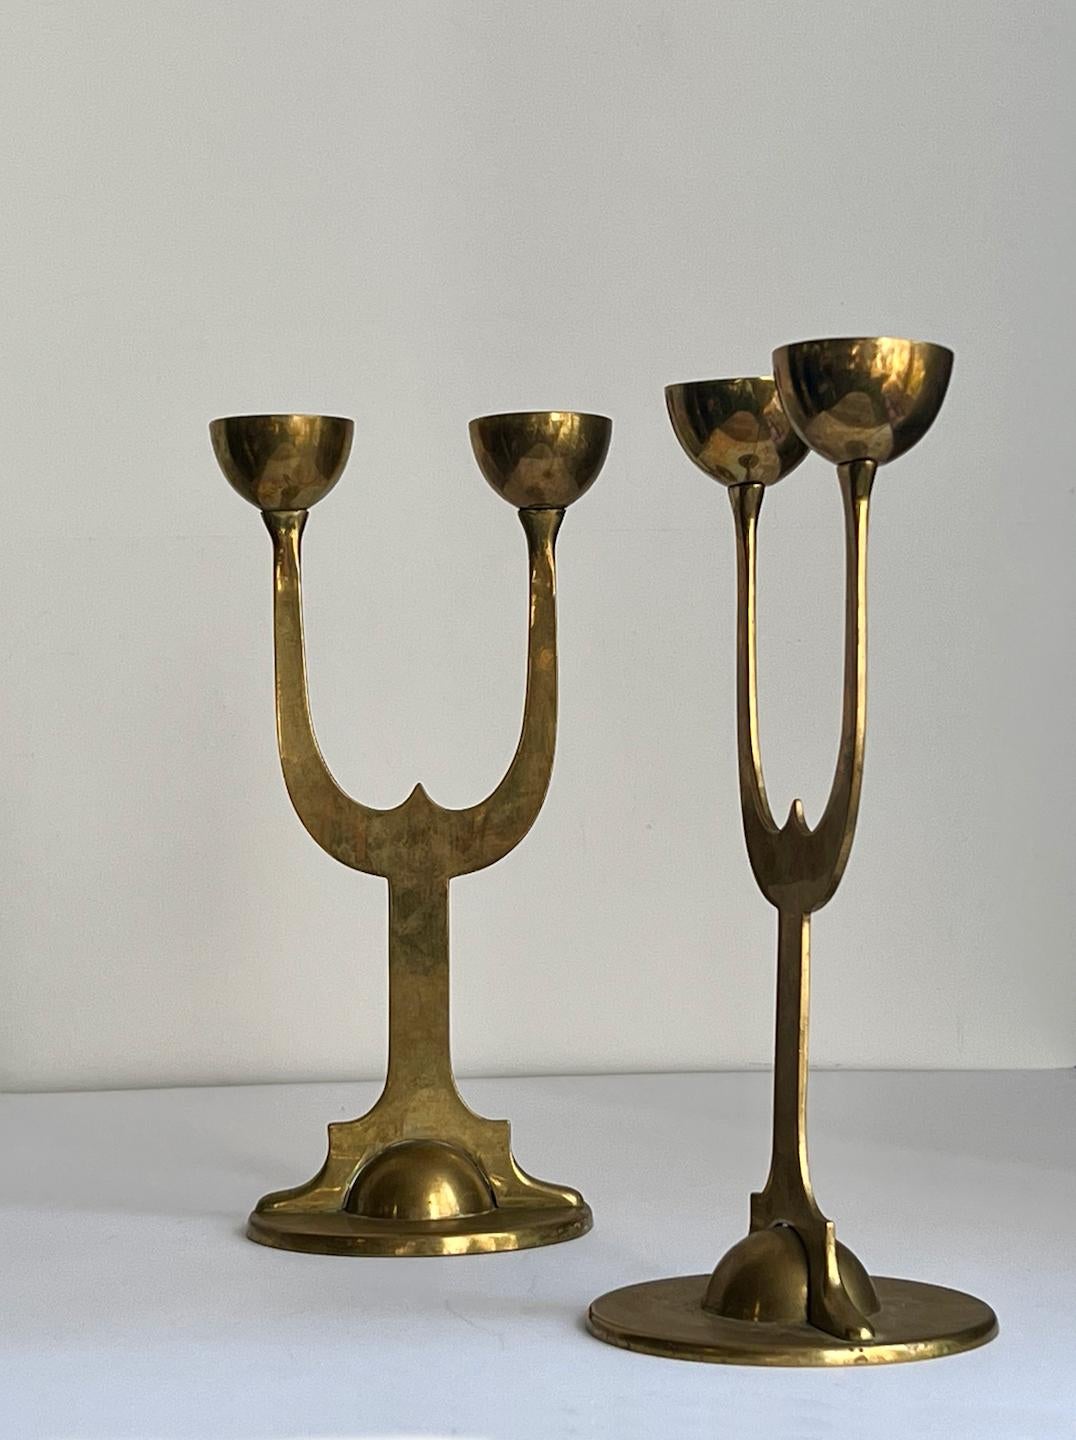 A pair of brass candlesticks, in Art Nouveau style. First half 20th century, Sweden.

Simple design, of sheet and cast brass. Good condition with some age-related wear, old cleaner and wax; some twisting to the position of the holders.

Approximate